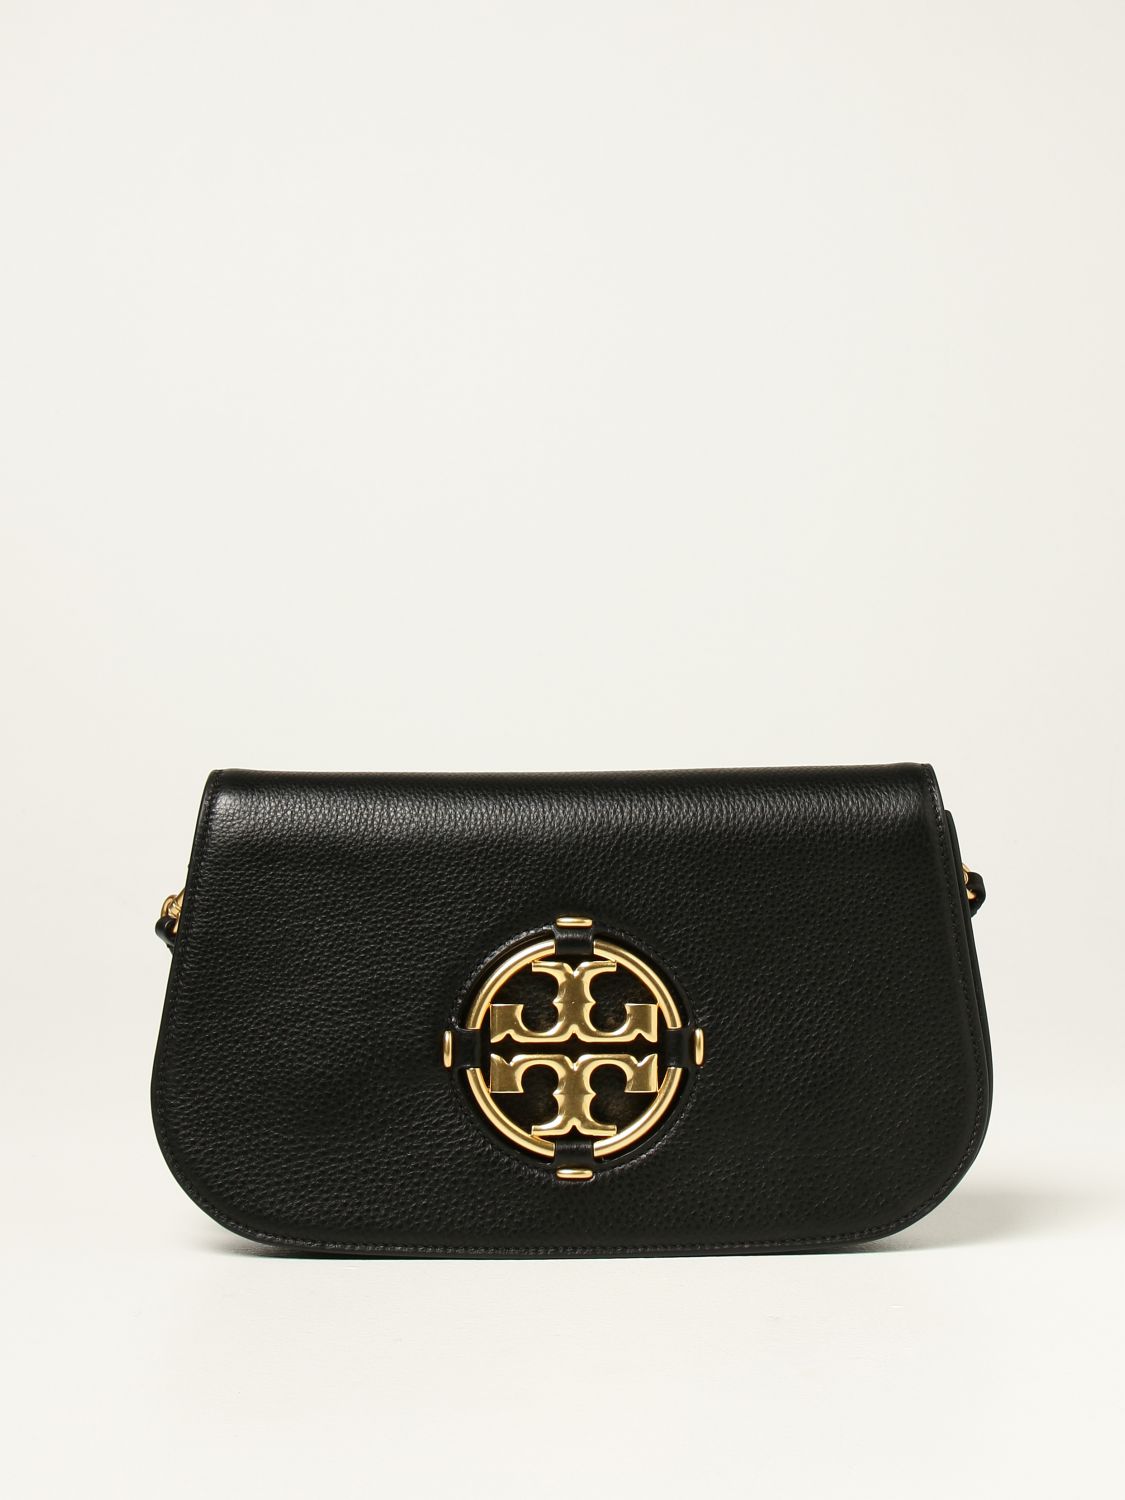 TORY BURCH: Miller bag in grained leather with emblem - Black | Tory Burch  crossbody bags 81971 online on 